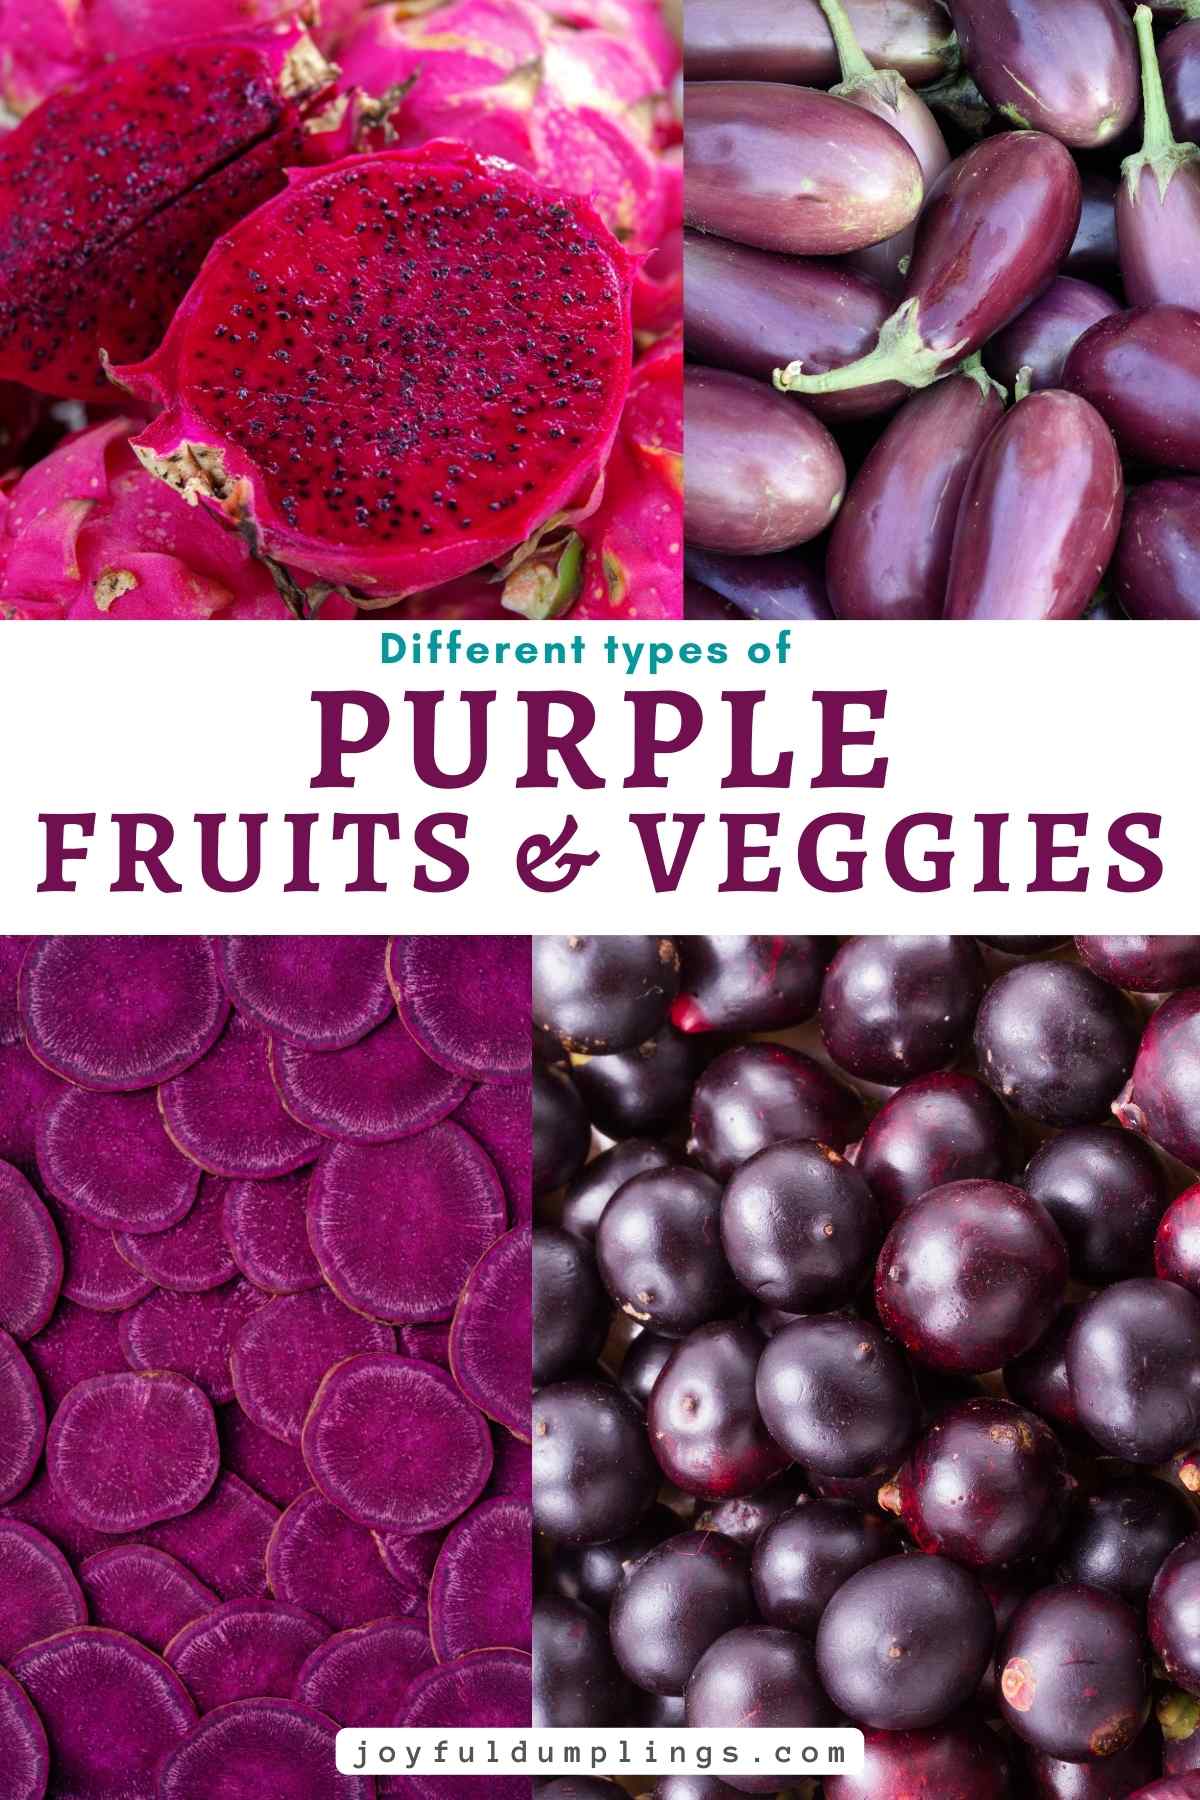 Fruits and Vegetables that are purple in color